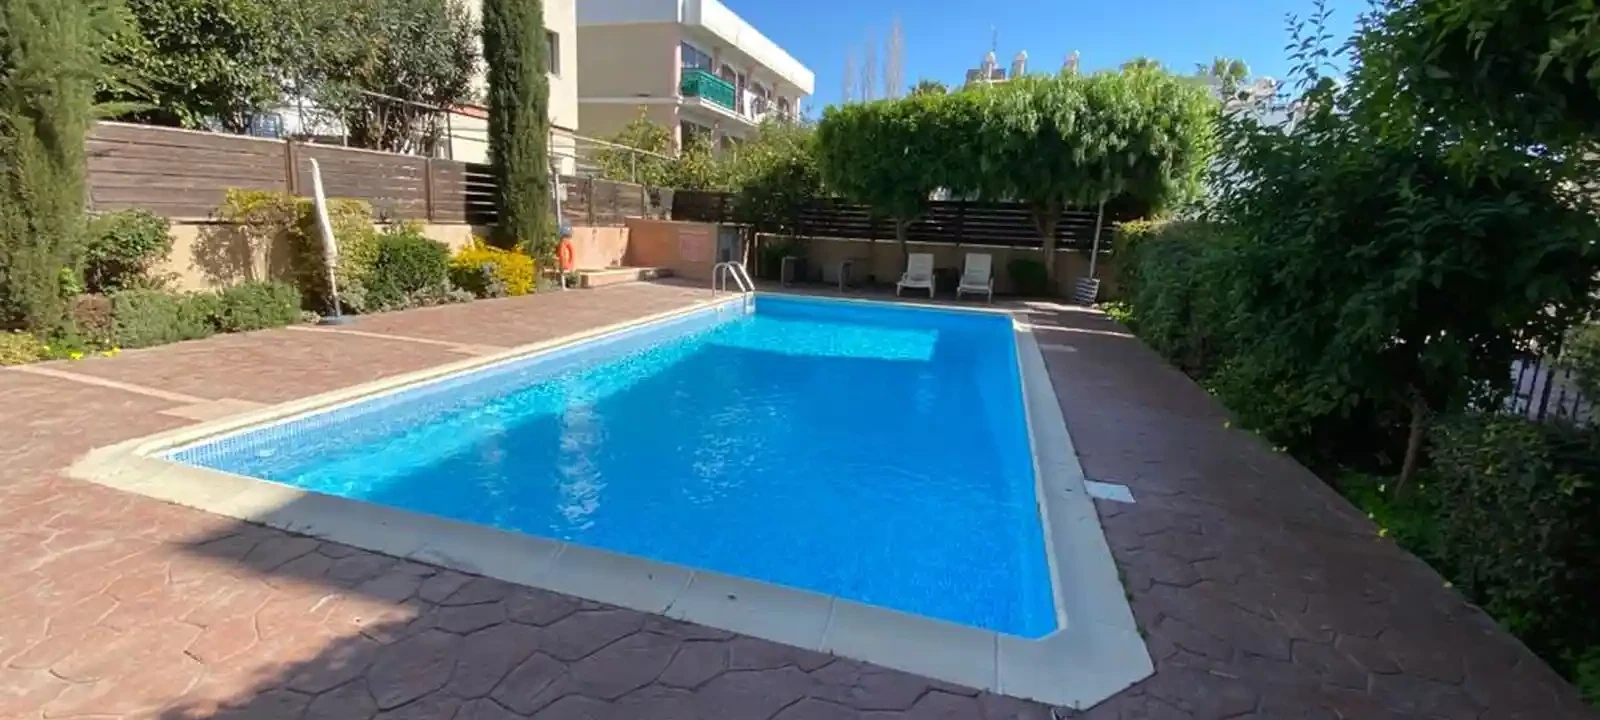 2-bedroom apartment fоr sаle €350.000, image 1